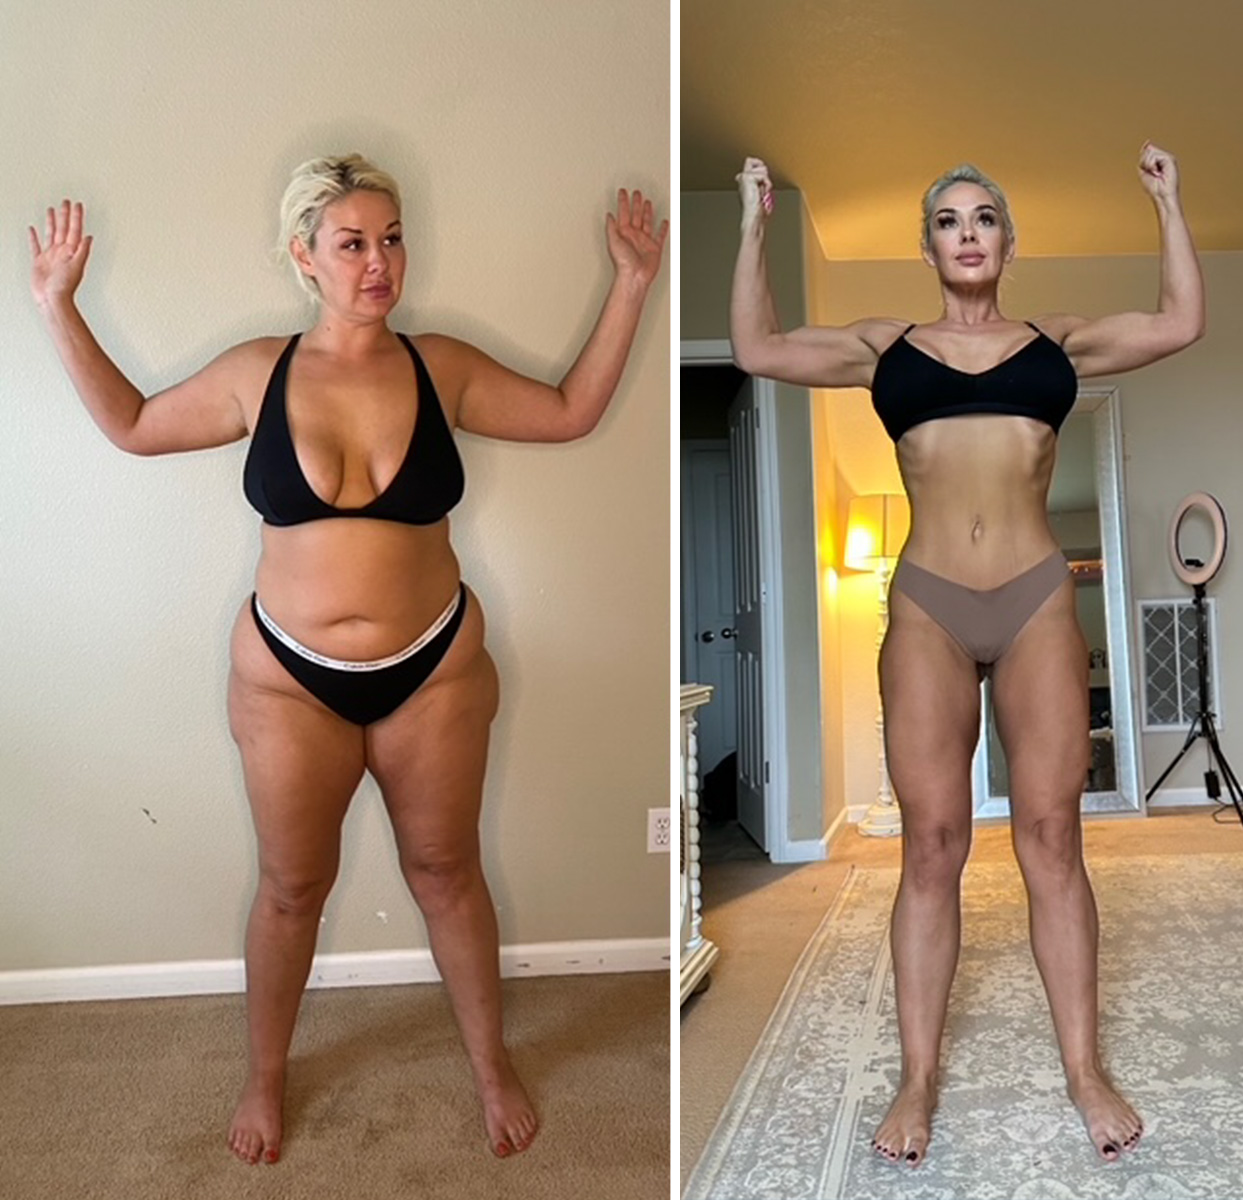 Woman Reveals How She Lost 80lbs In 8 Months While Eating Favorite Foods pic